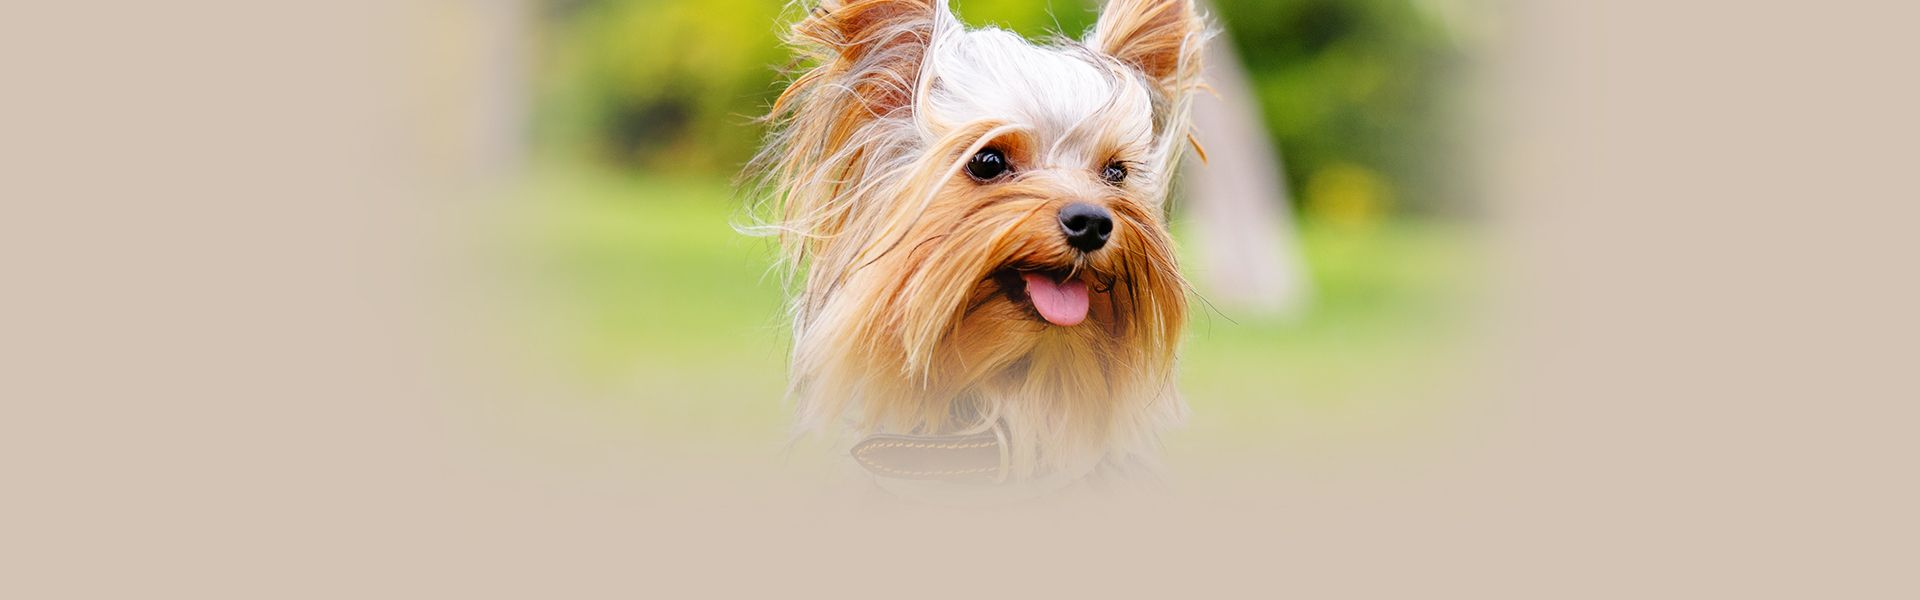 smiling yorkshire terrier dog with a green blurry background